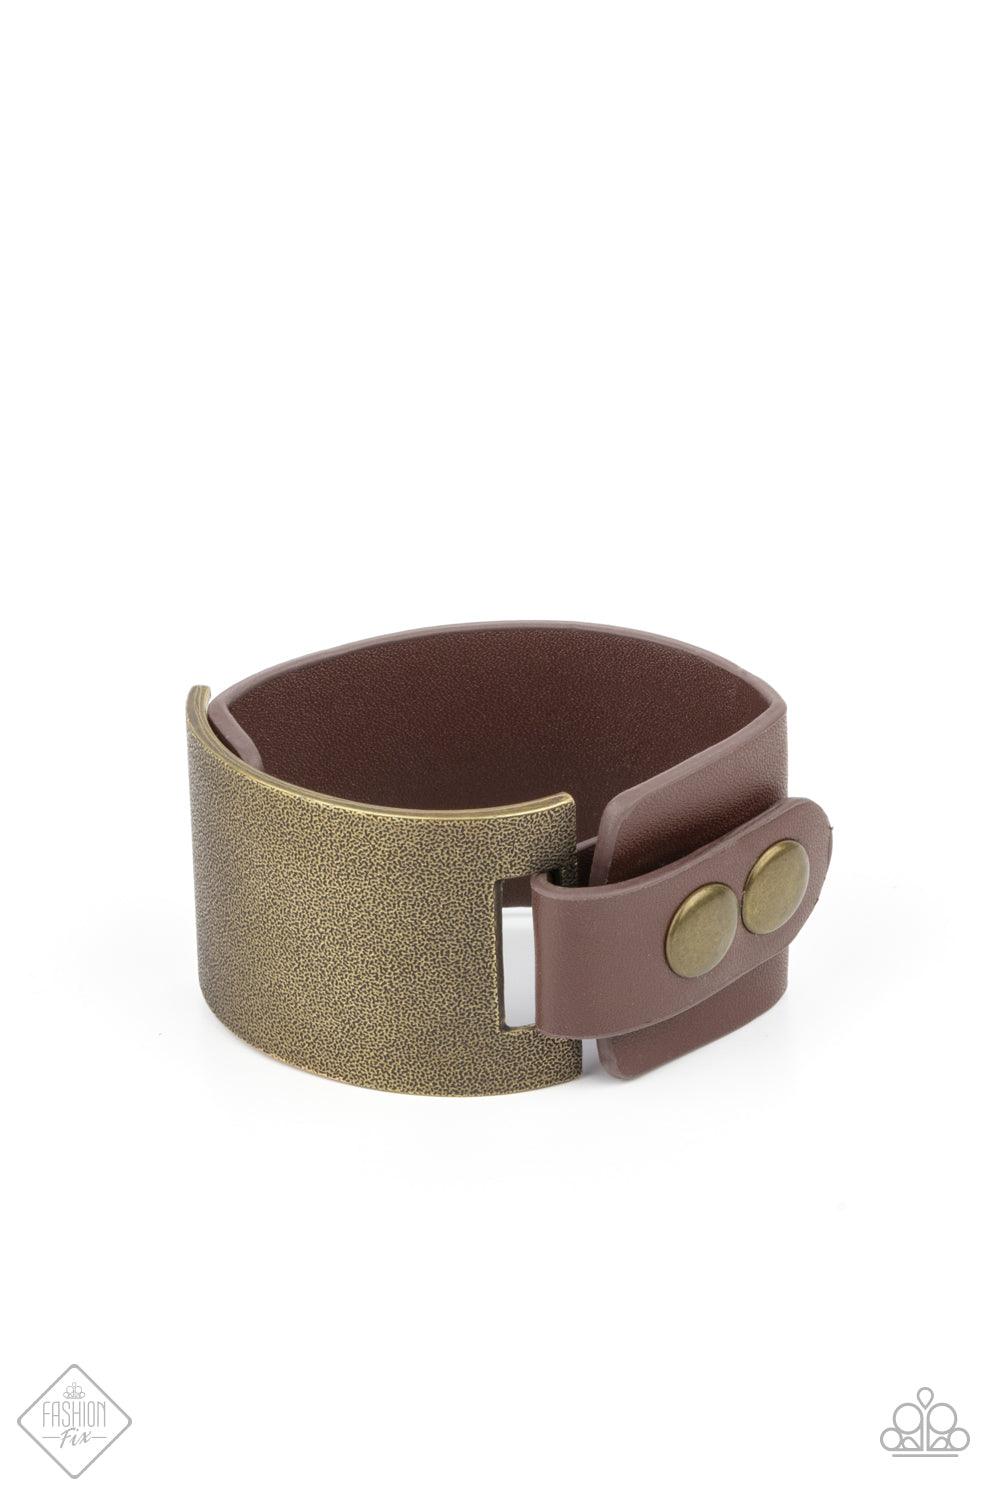 Paparazzi Accessories Studded Synchronism - Brass A curved brass panel, coated in antiqued texture, attaches to a wide brown leather band with brass snaps resulting in an edgy industrial element around the wrist. Features an adjustable snap closure. Sold